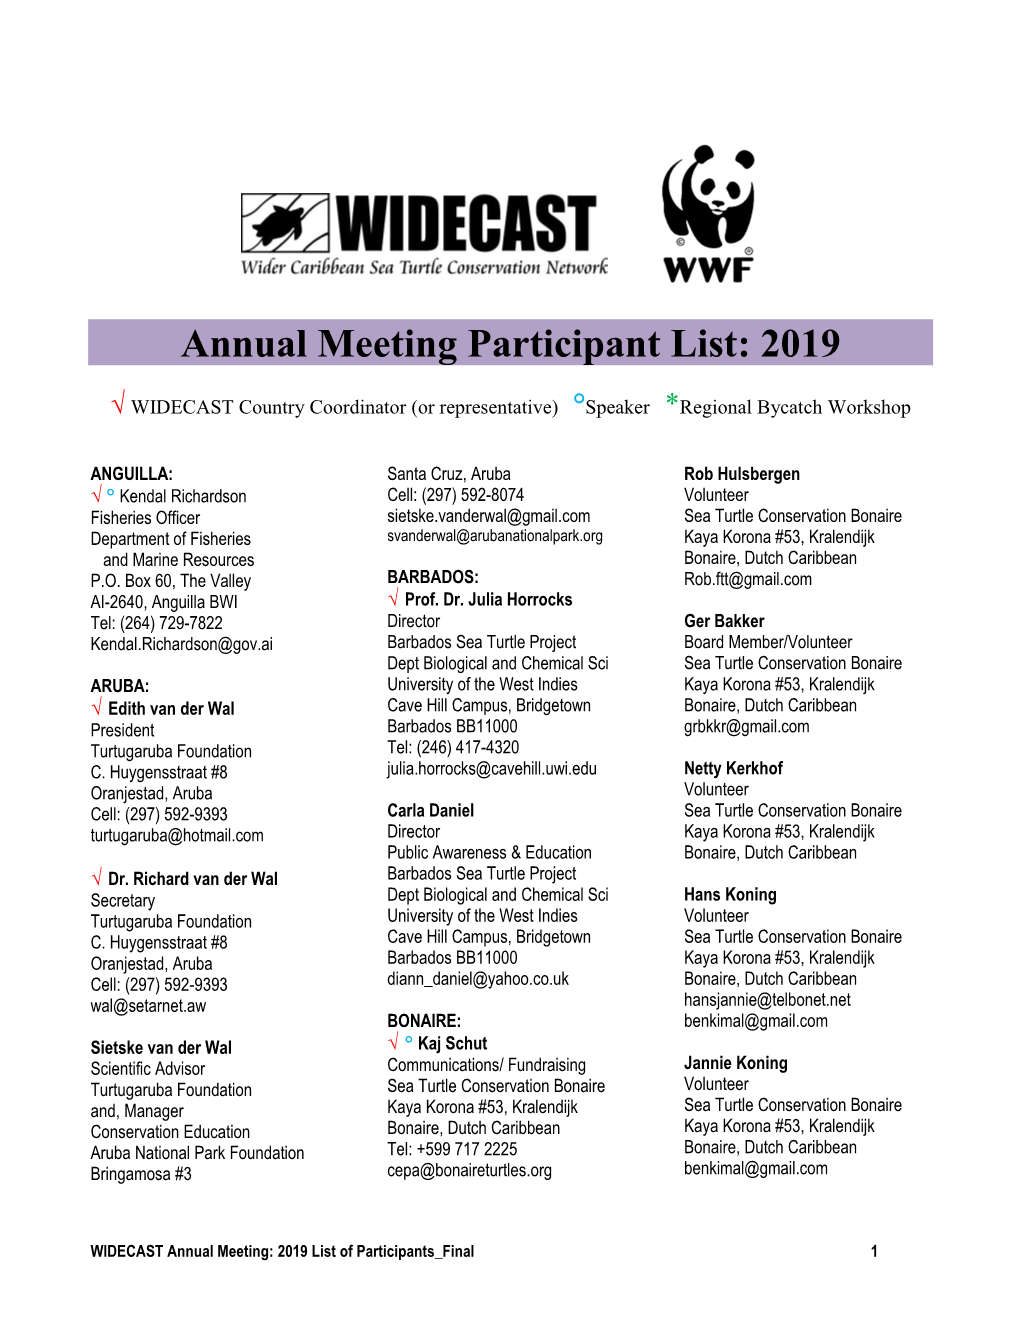 2019 WIDECAST Annual Meeting Participants